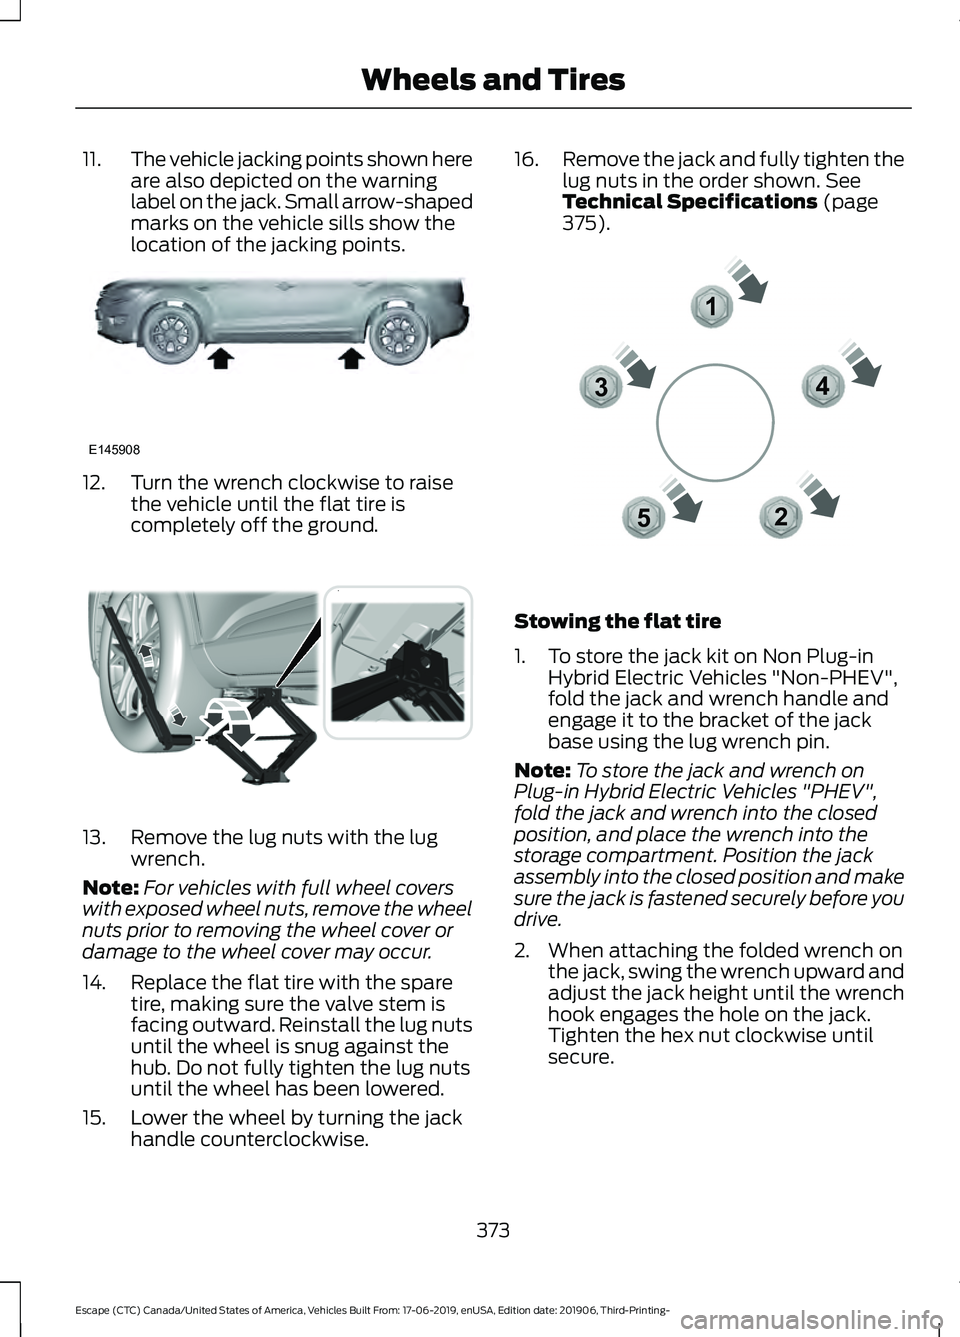 FORD ESCAPE 2020  Owners Manual 11.
The vehicle jacking points shown here
are also depicted on the warning
label on the jack. Small arrow-shaped
marks on the vehicle sills show the
location of the jacking points. 12. Turn the wrench